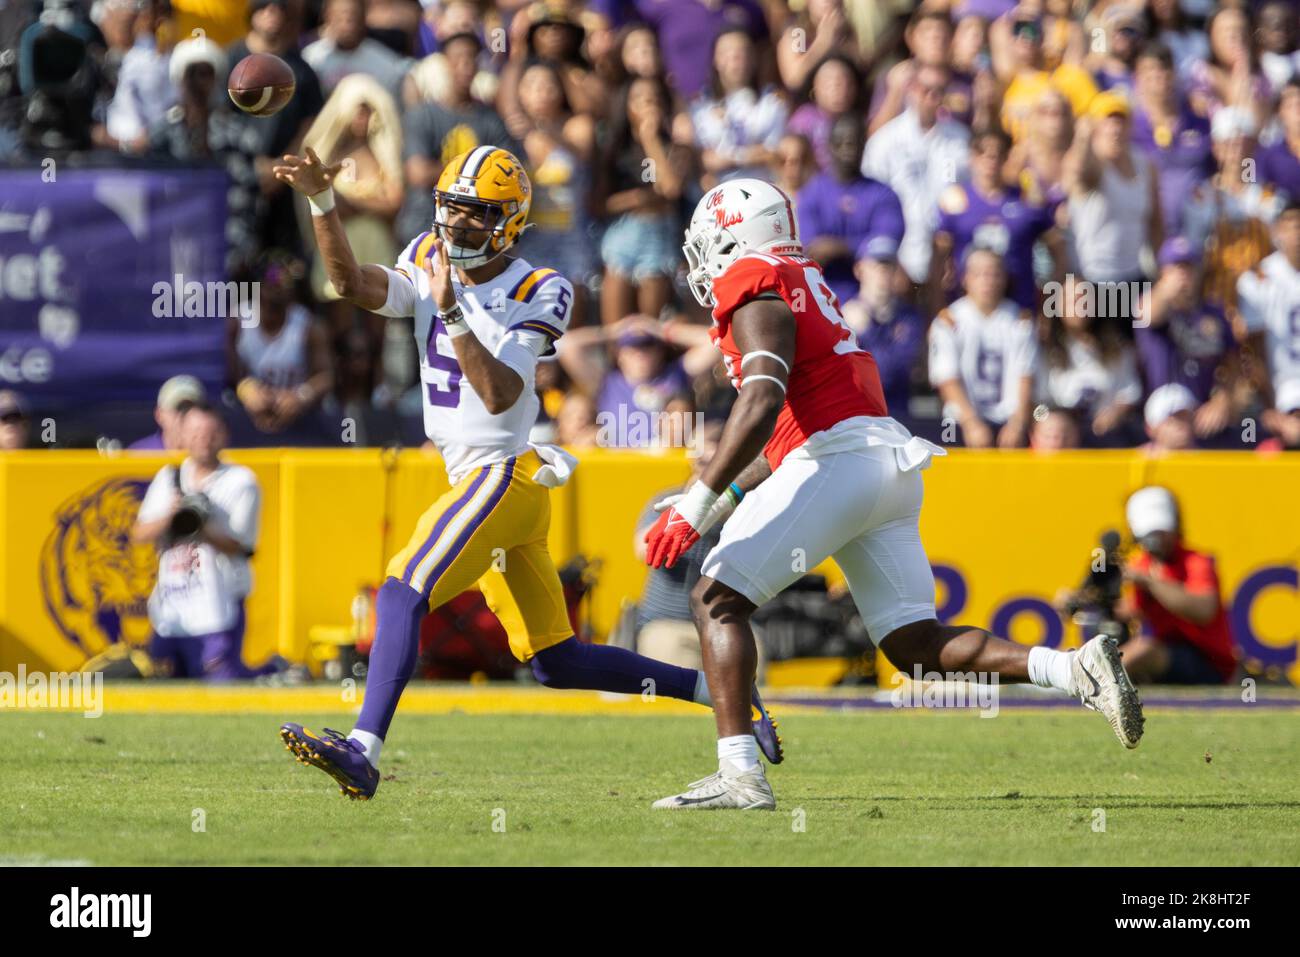 LSU Tigers quarterback Jayden Daniels (5) gets a pass off before Ole Miss Rebels defensive tackle Jamond Gordon (97) can make the tackle, Saturday, Oc Stock Photo